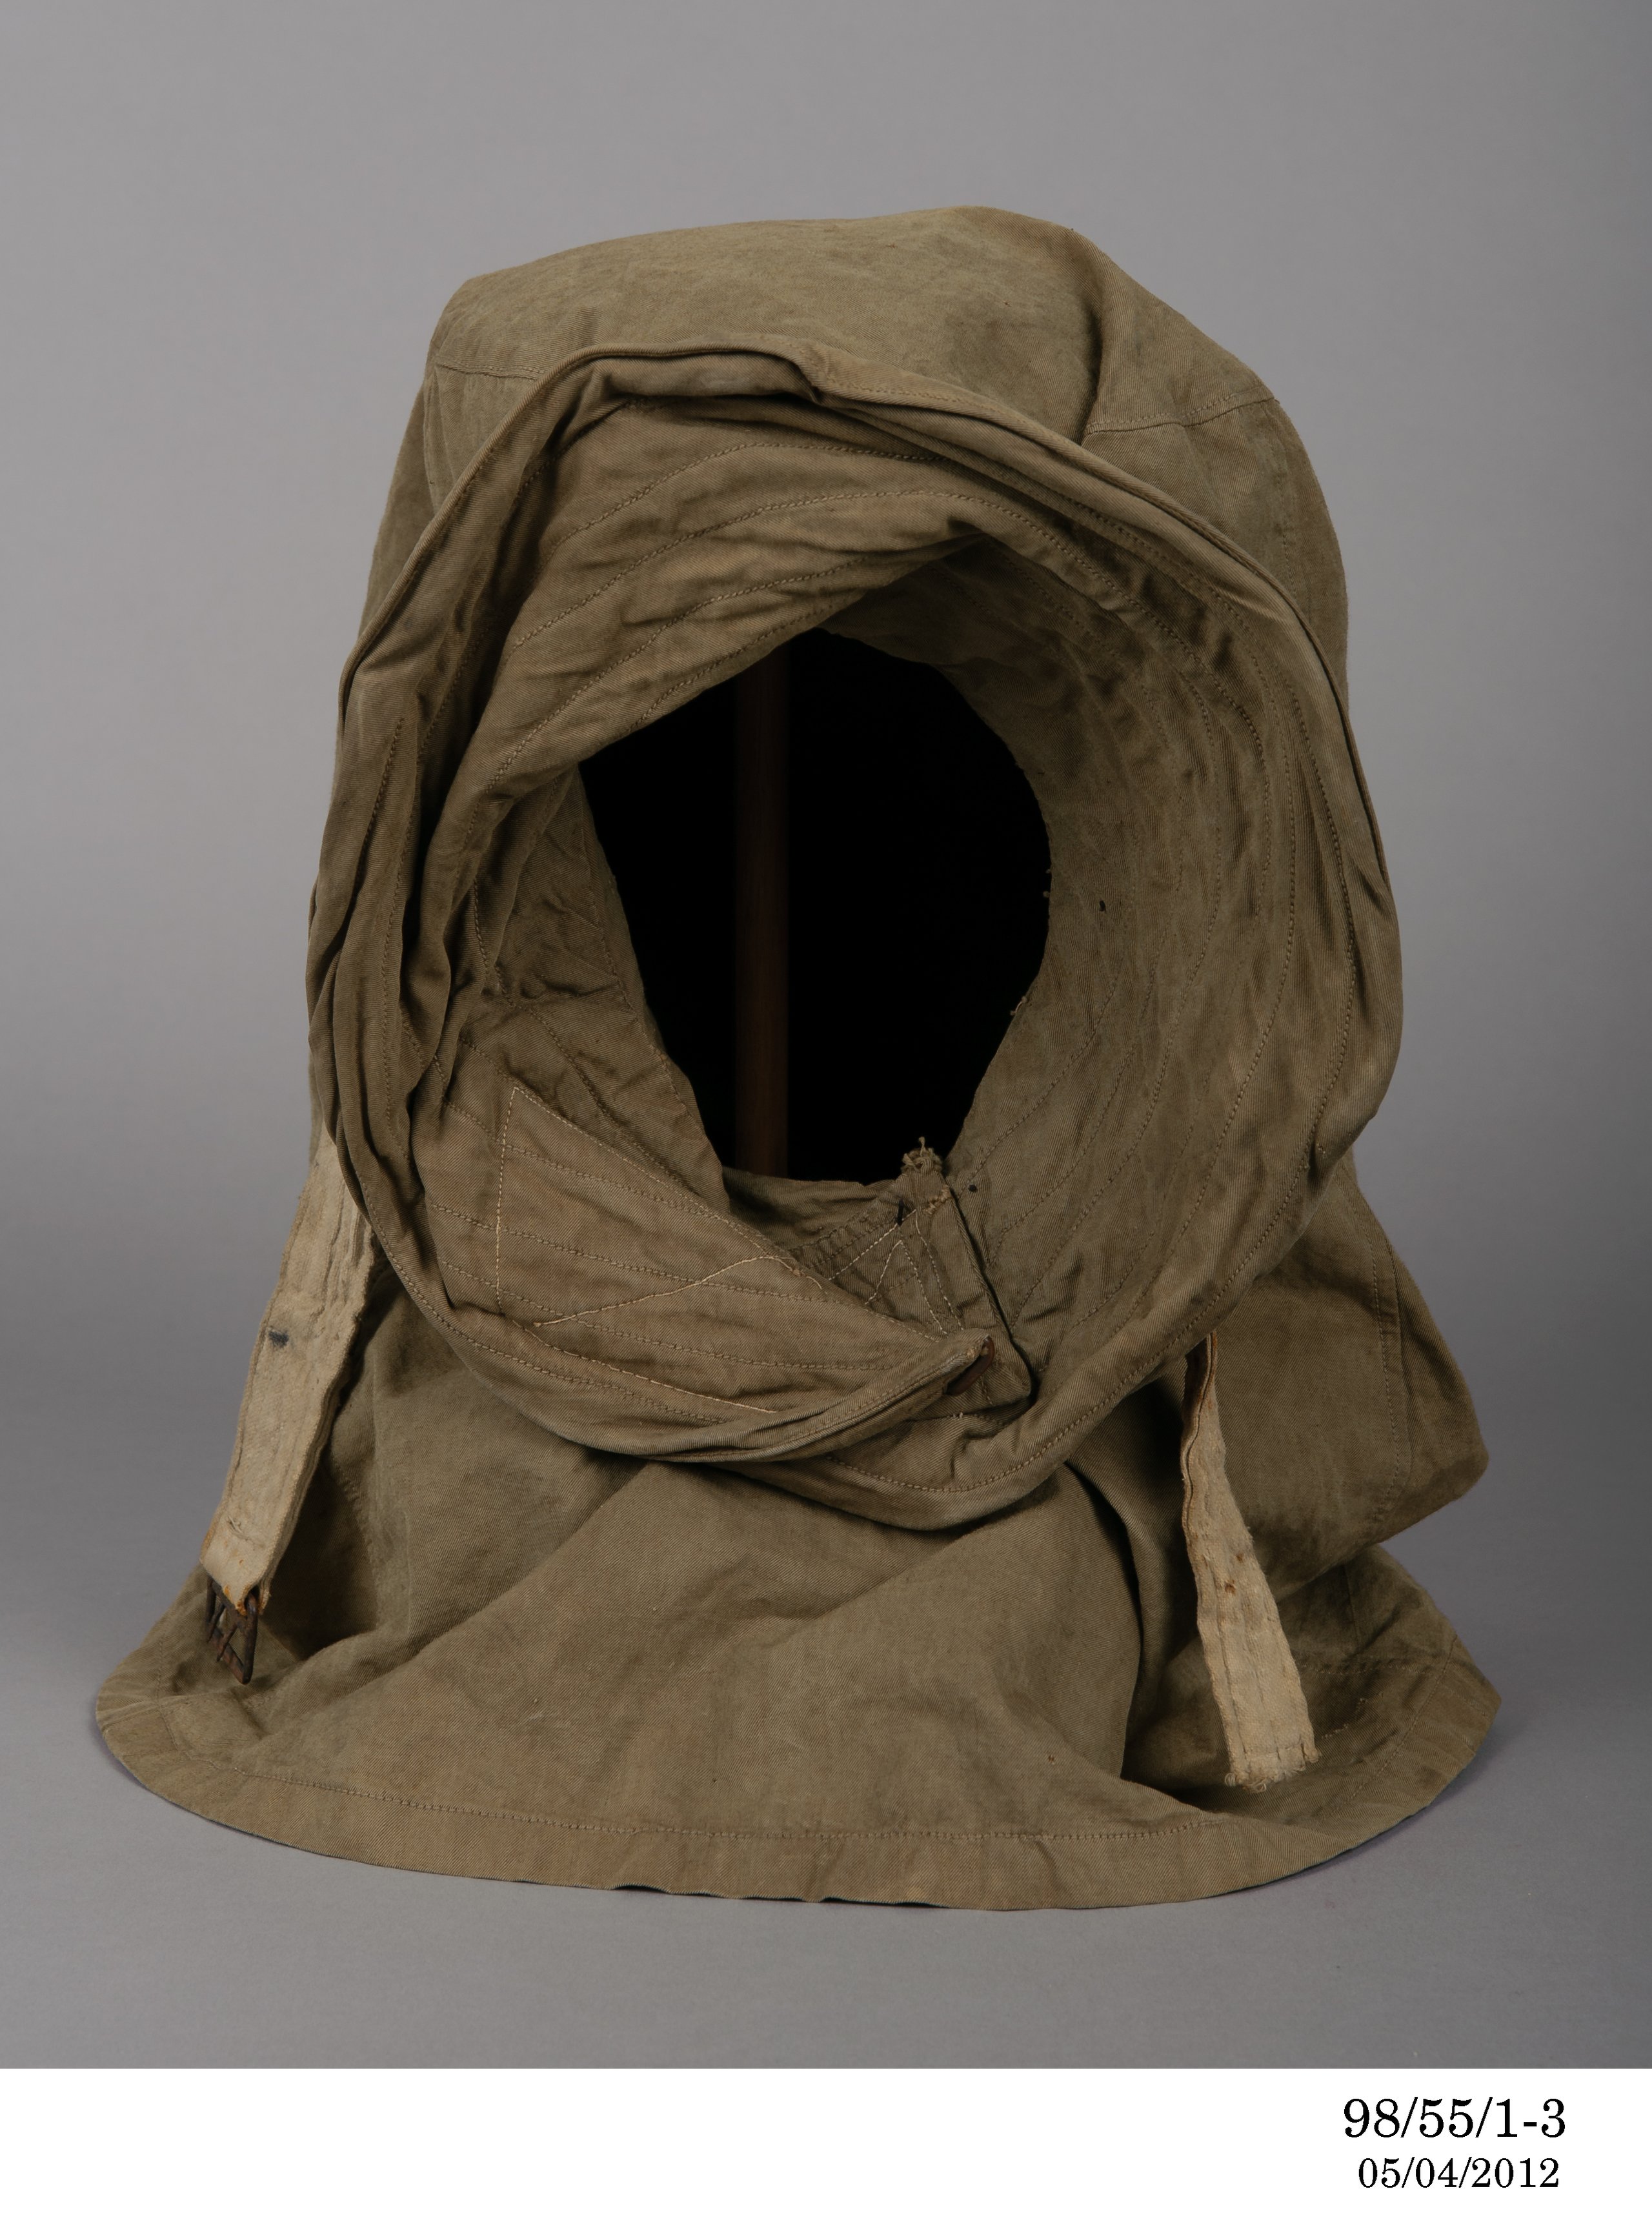 Hood used by Charles Laseron during Mawson's Australasian Antarctic Expedition.